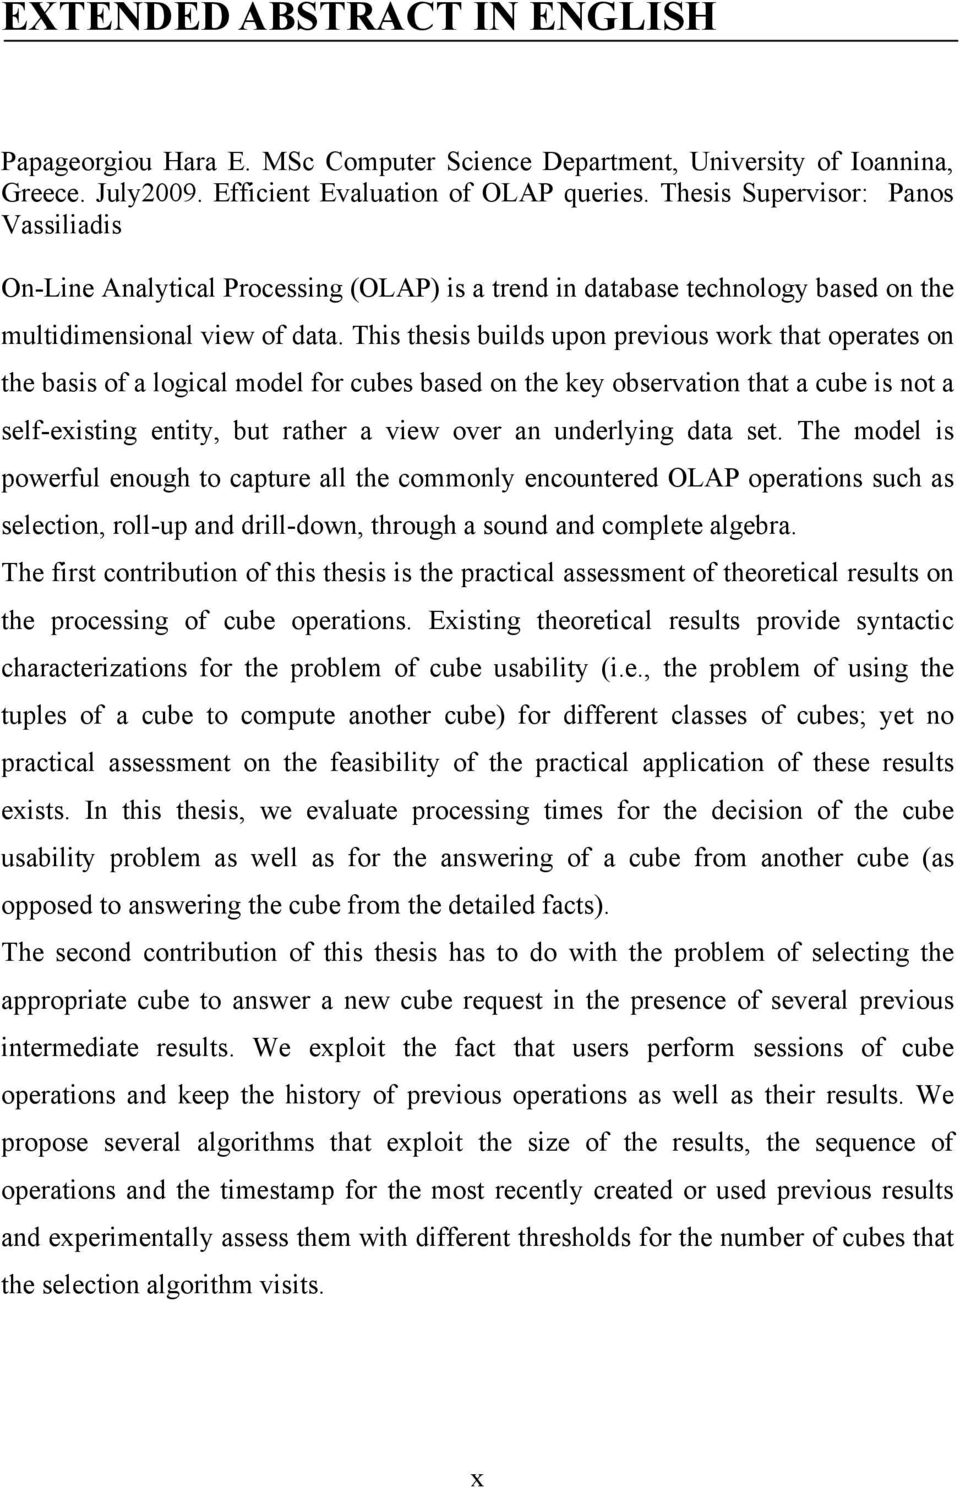 This thesis builds upon previous work that operates on the basis of a logical model for cubes based on the key observation that a cube is not a self-existing entity, but rather a view over an